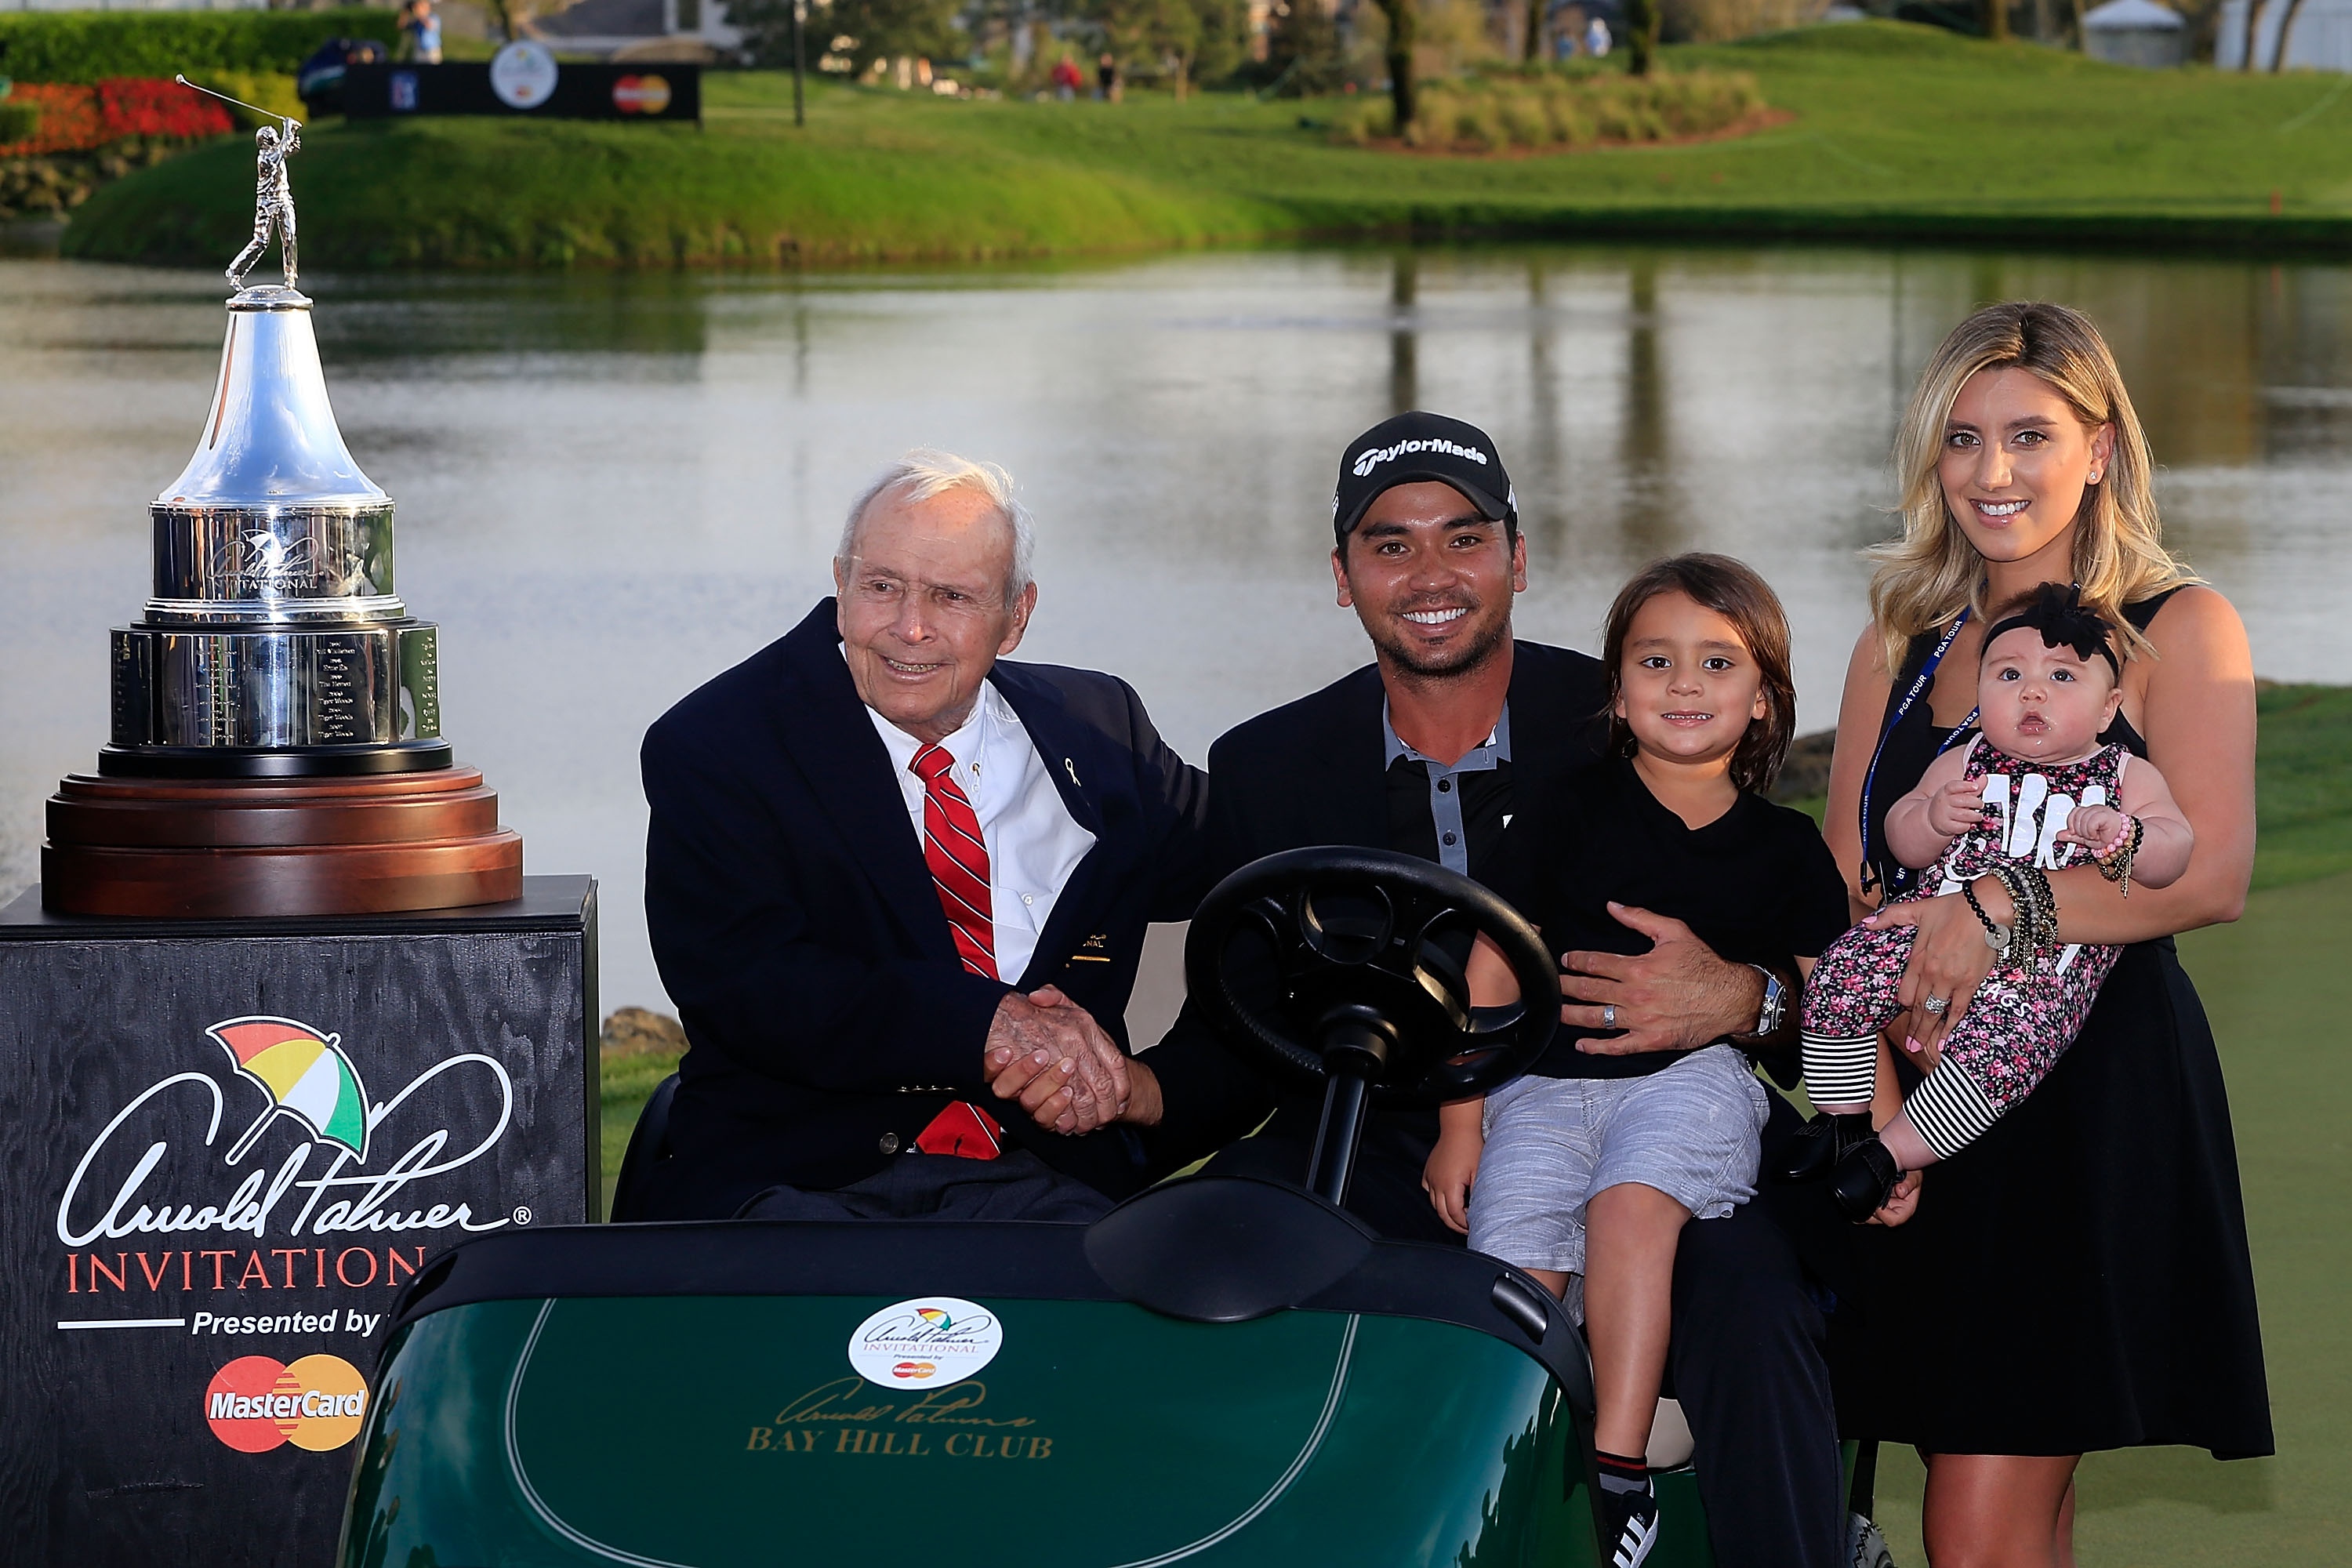 ORLANDO, FL - MARCH 20: Arnold Palmer poses with Jason Day of Australia his wife Ellie and children Dash and Lucy following the final round of the Arnold Palmer Invitational Presented by MasterCard at Bay Hill Club and Lodge on March 20, 2016 in Orlando, Florida. (Photo by Chris Trotman/Getty Images)